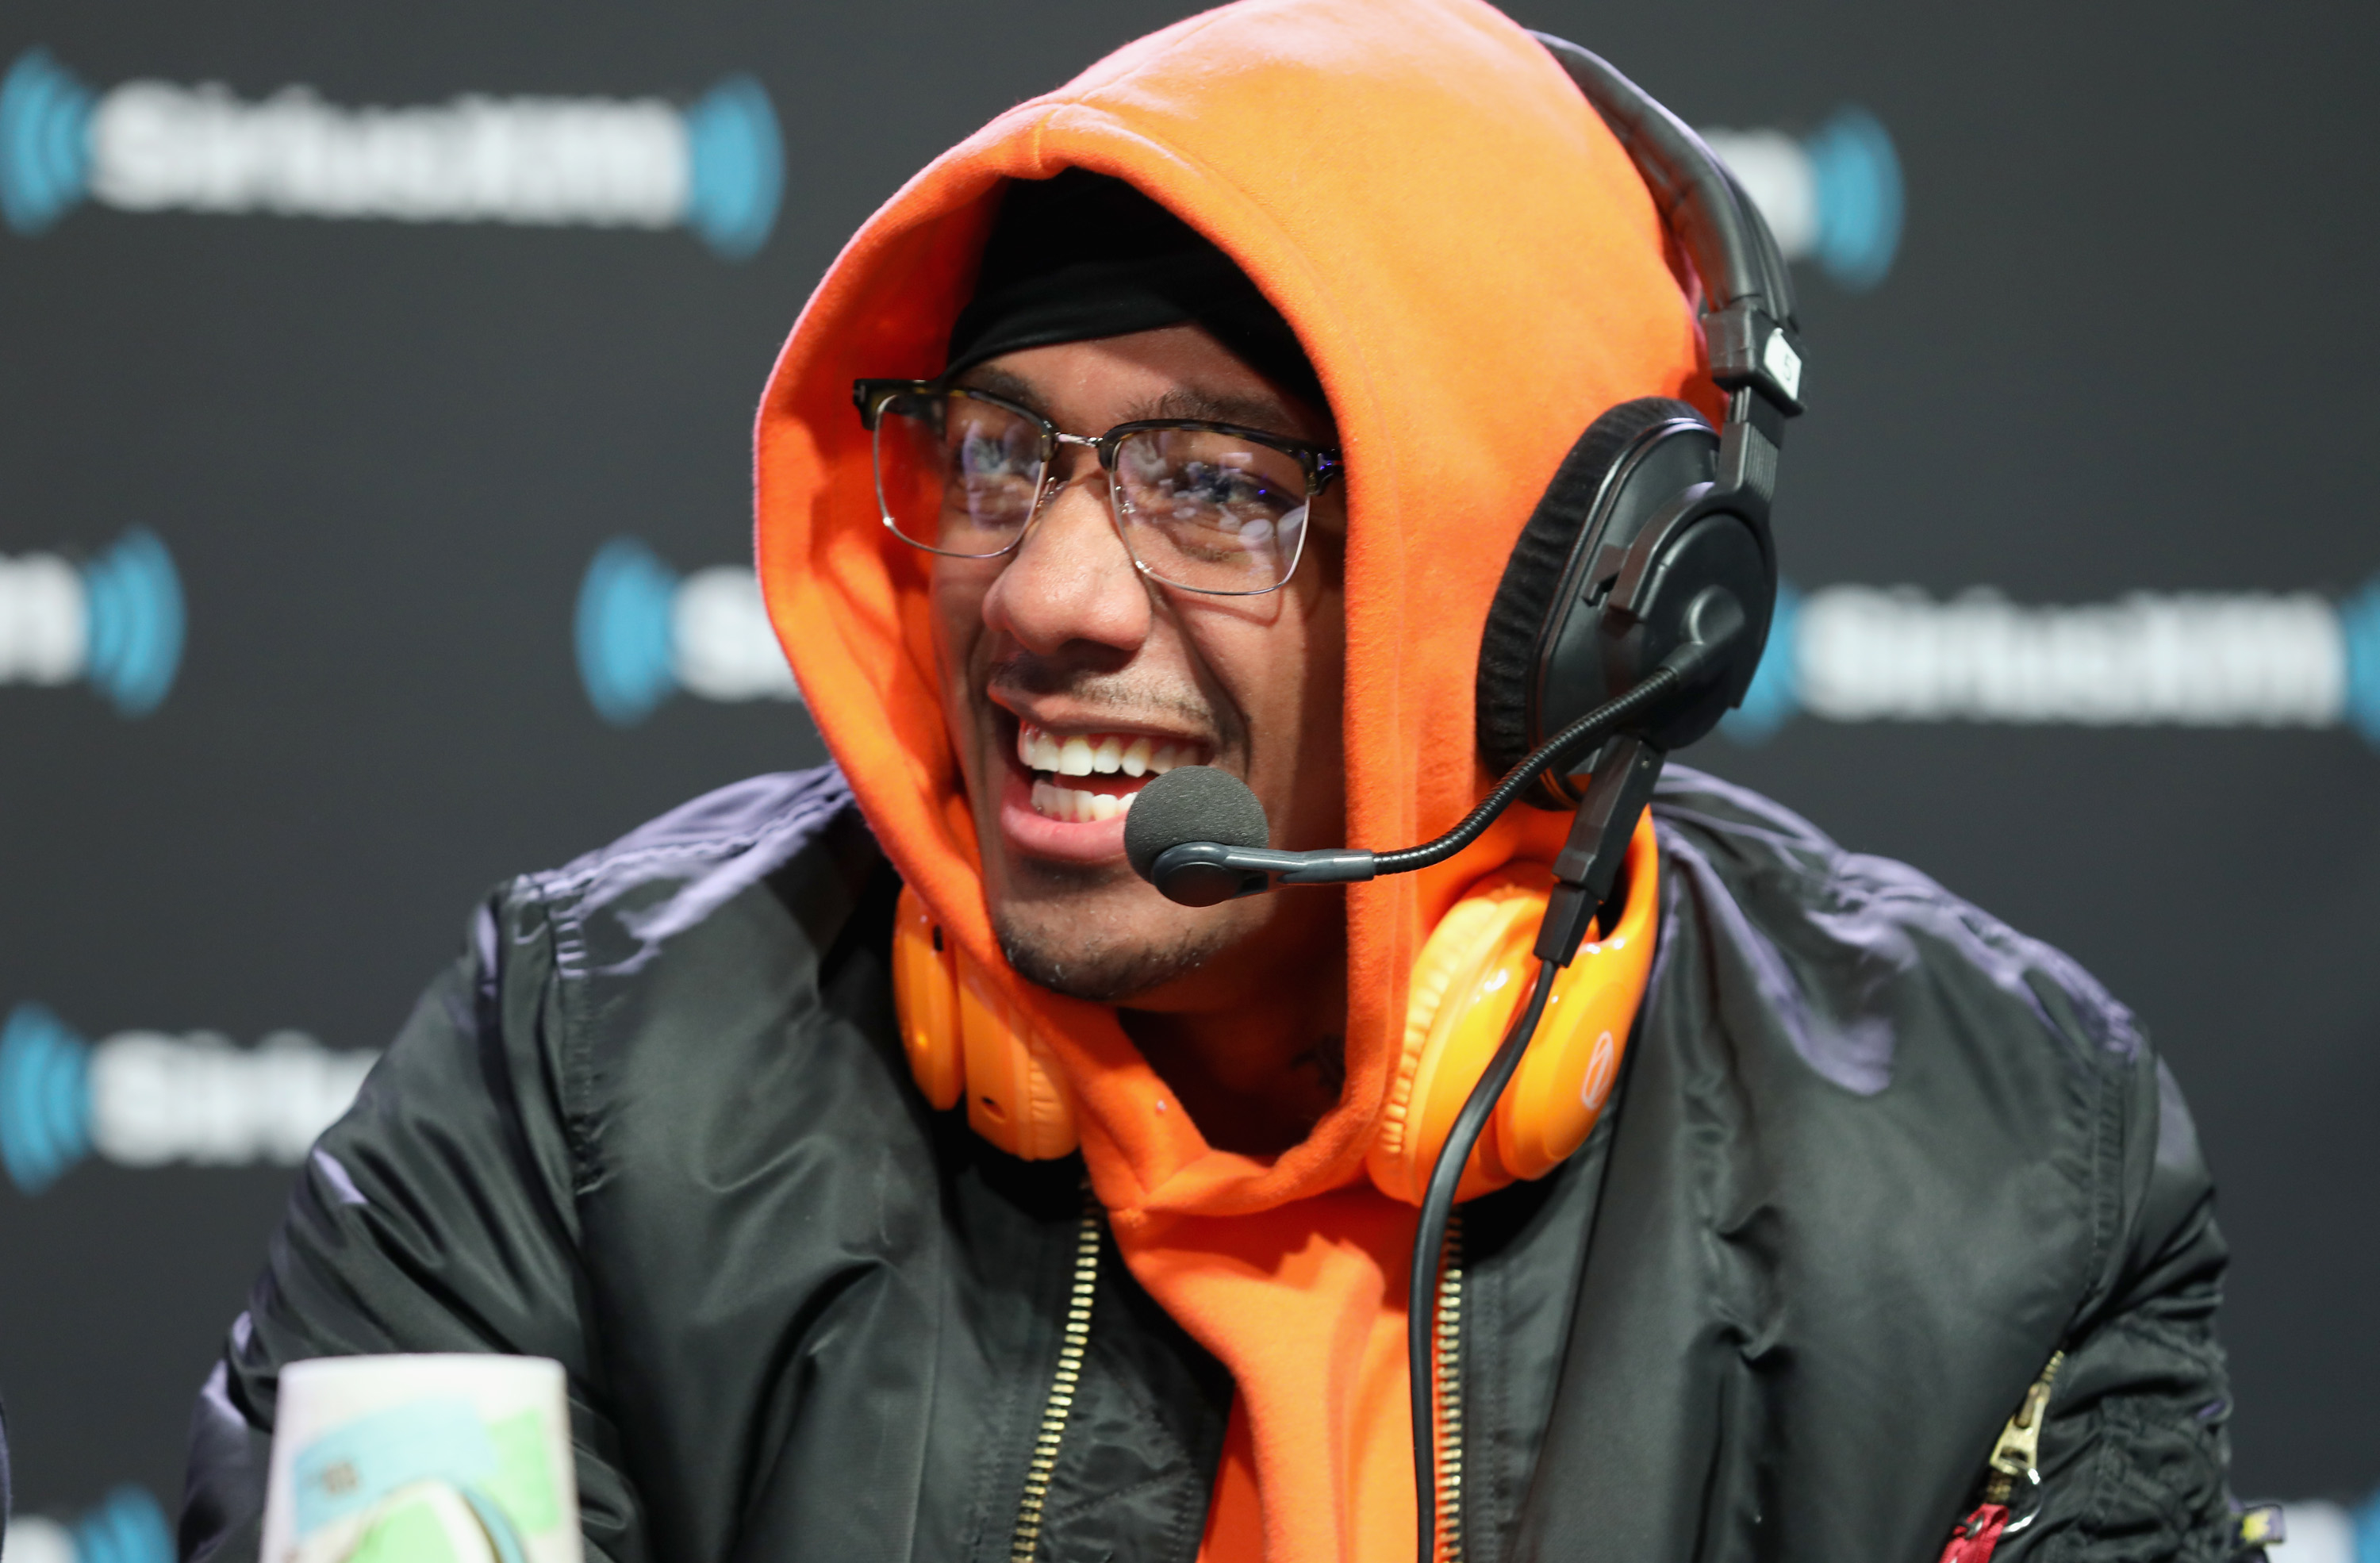 Man in orange hoodie and headphones smiling during a podcast recording session